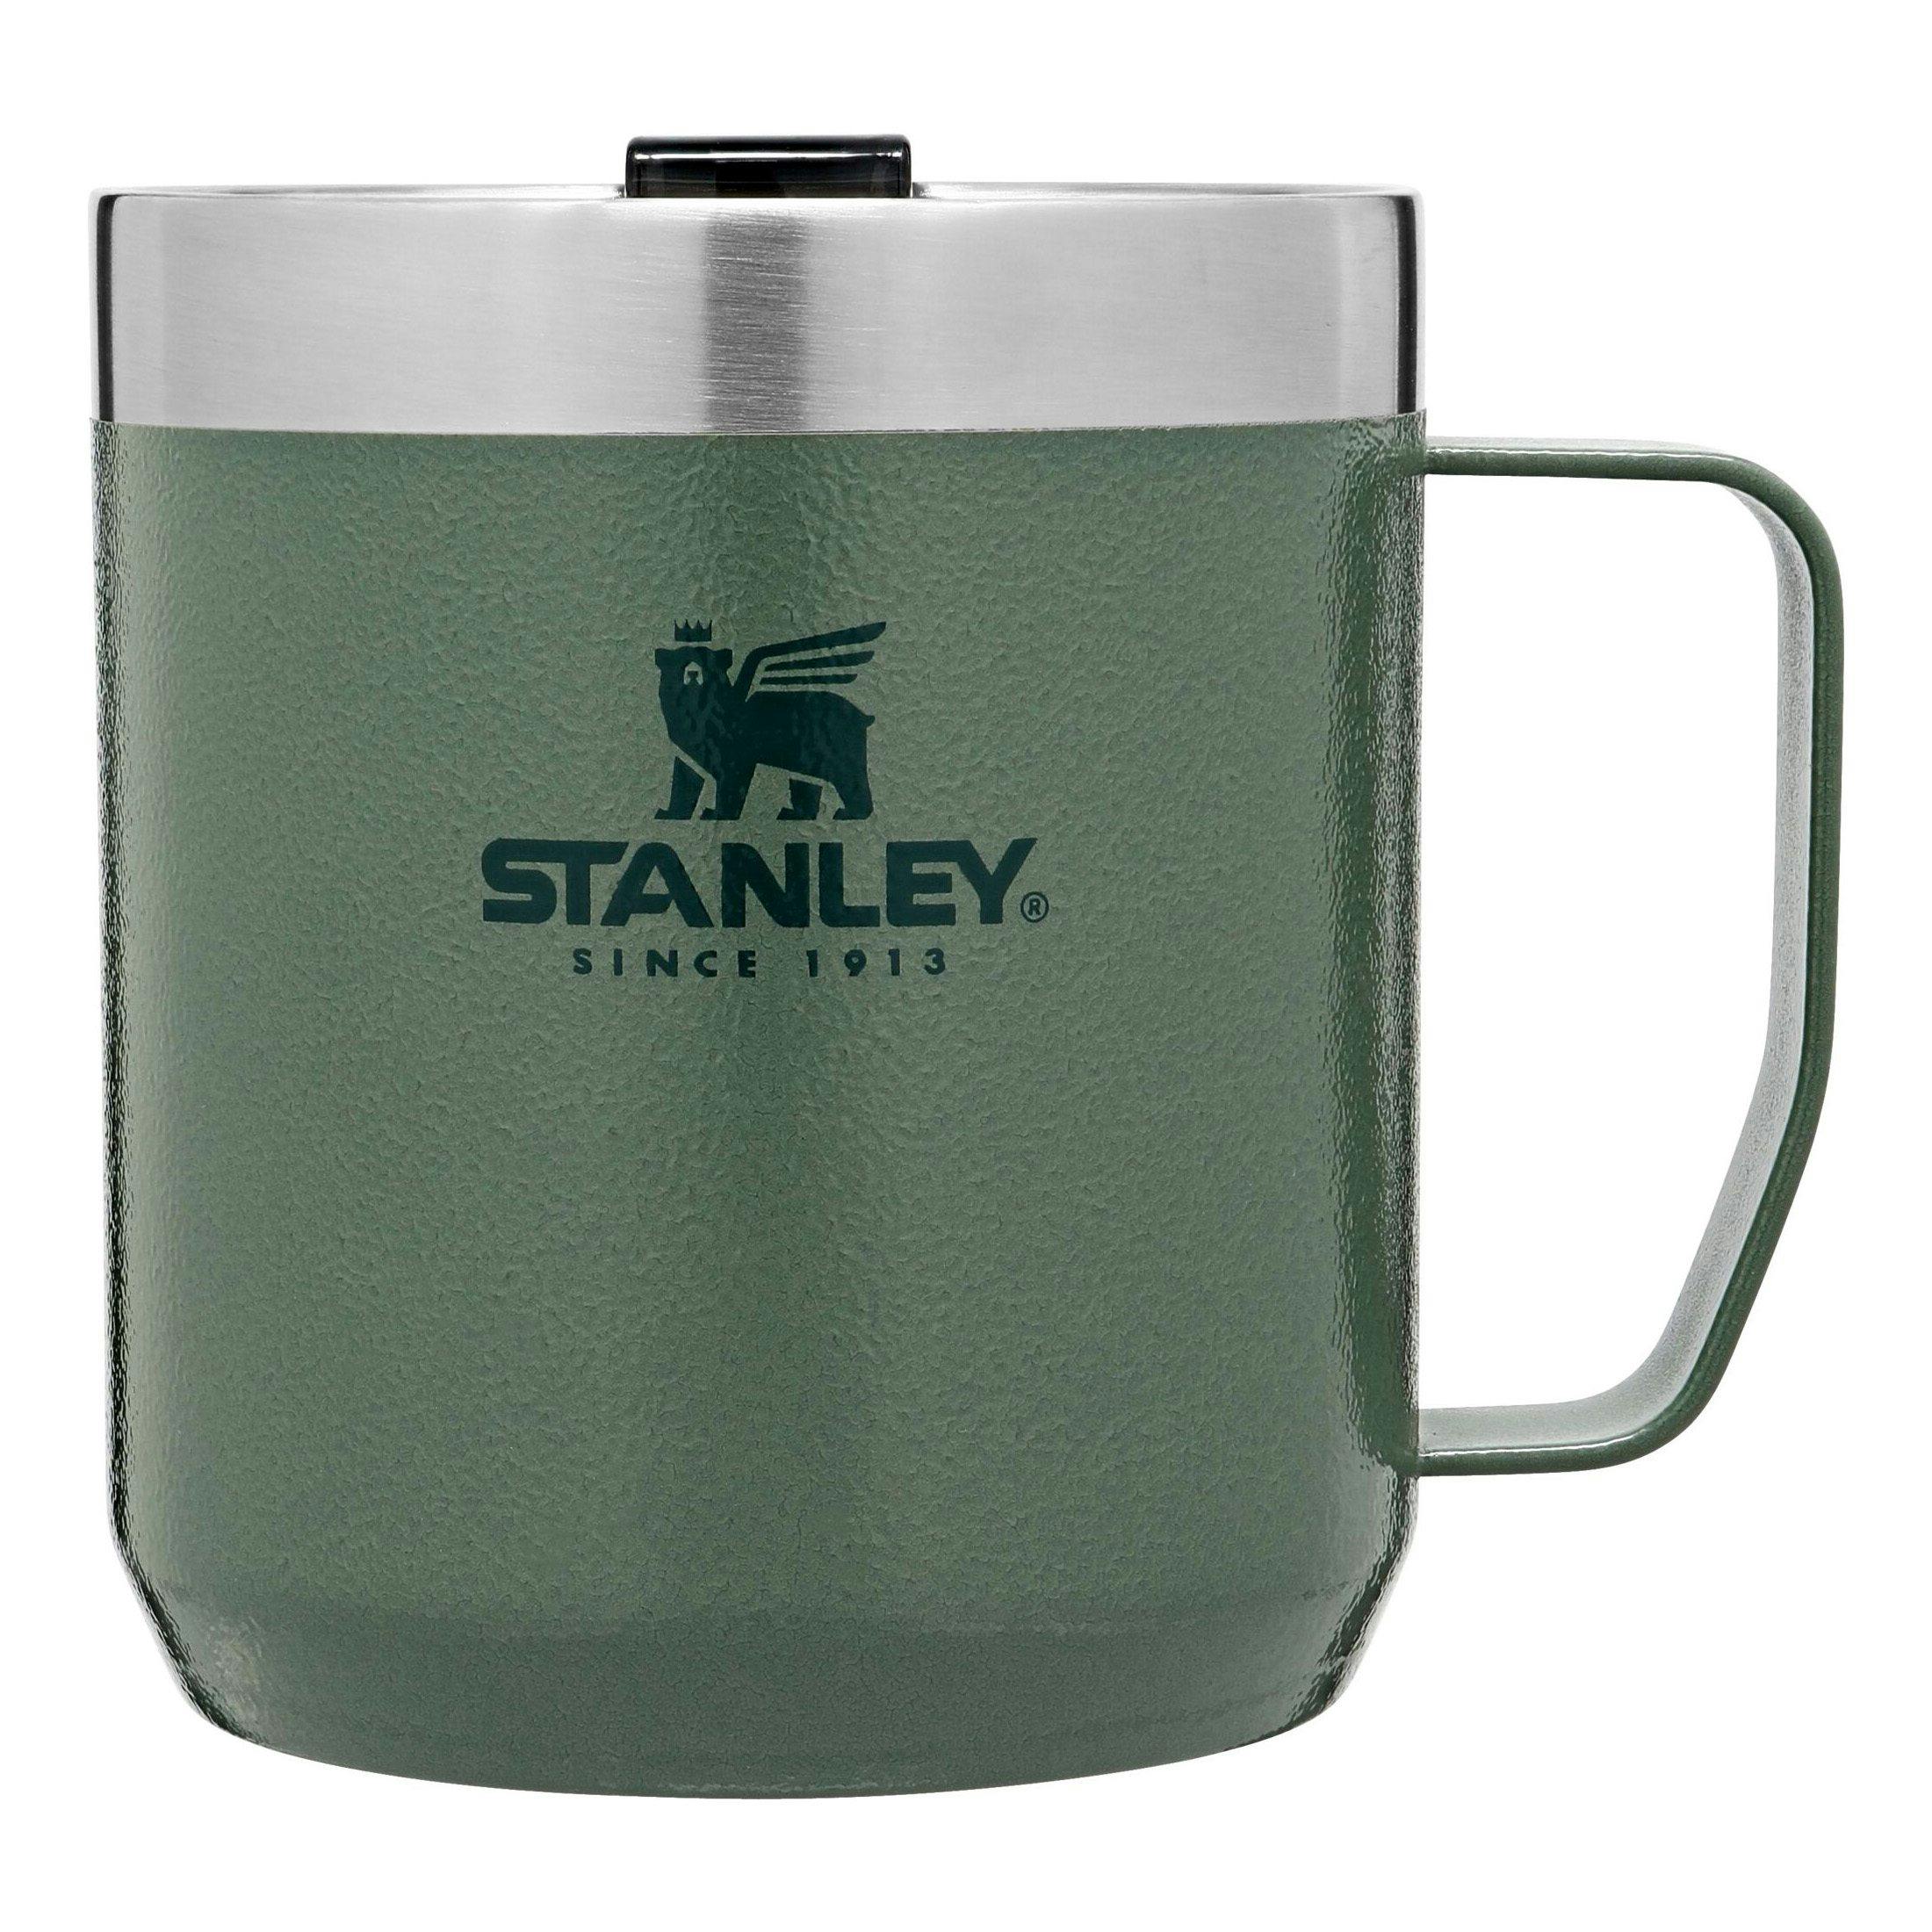 Stanley Camping Equipment